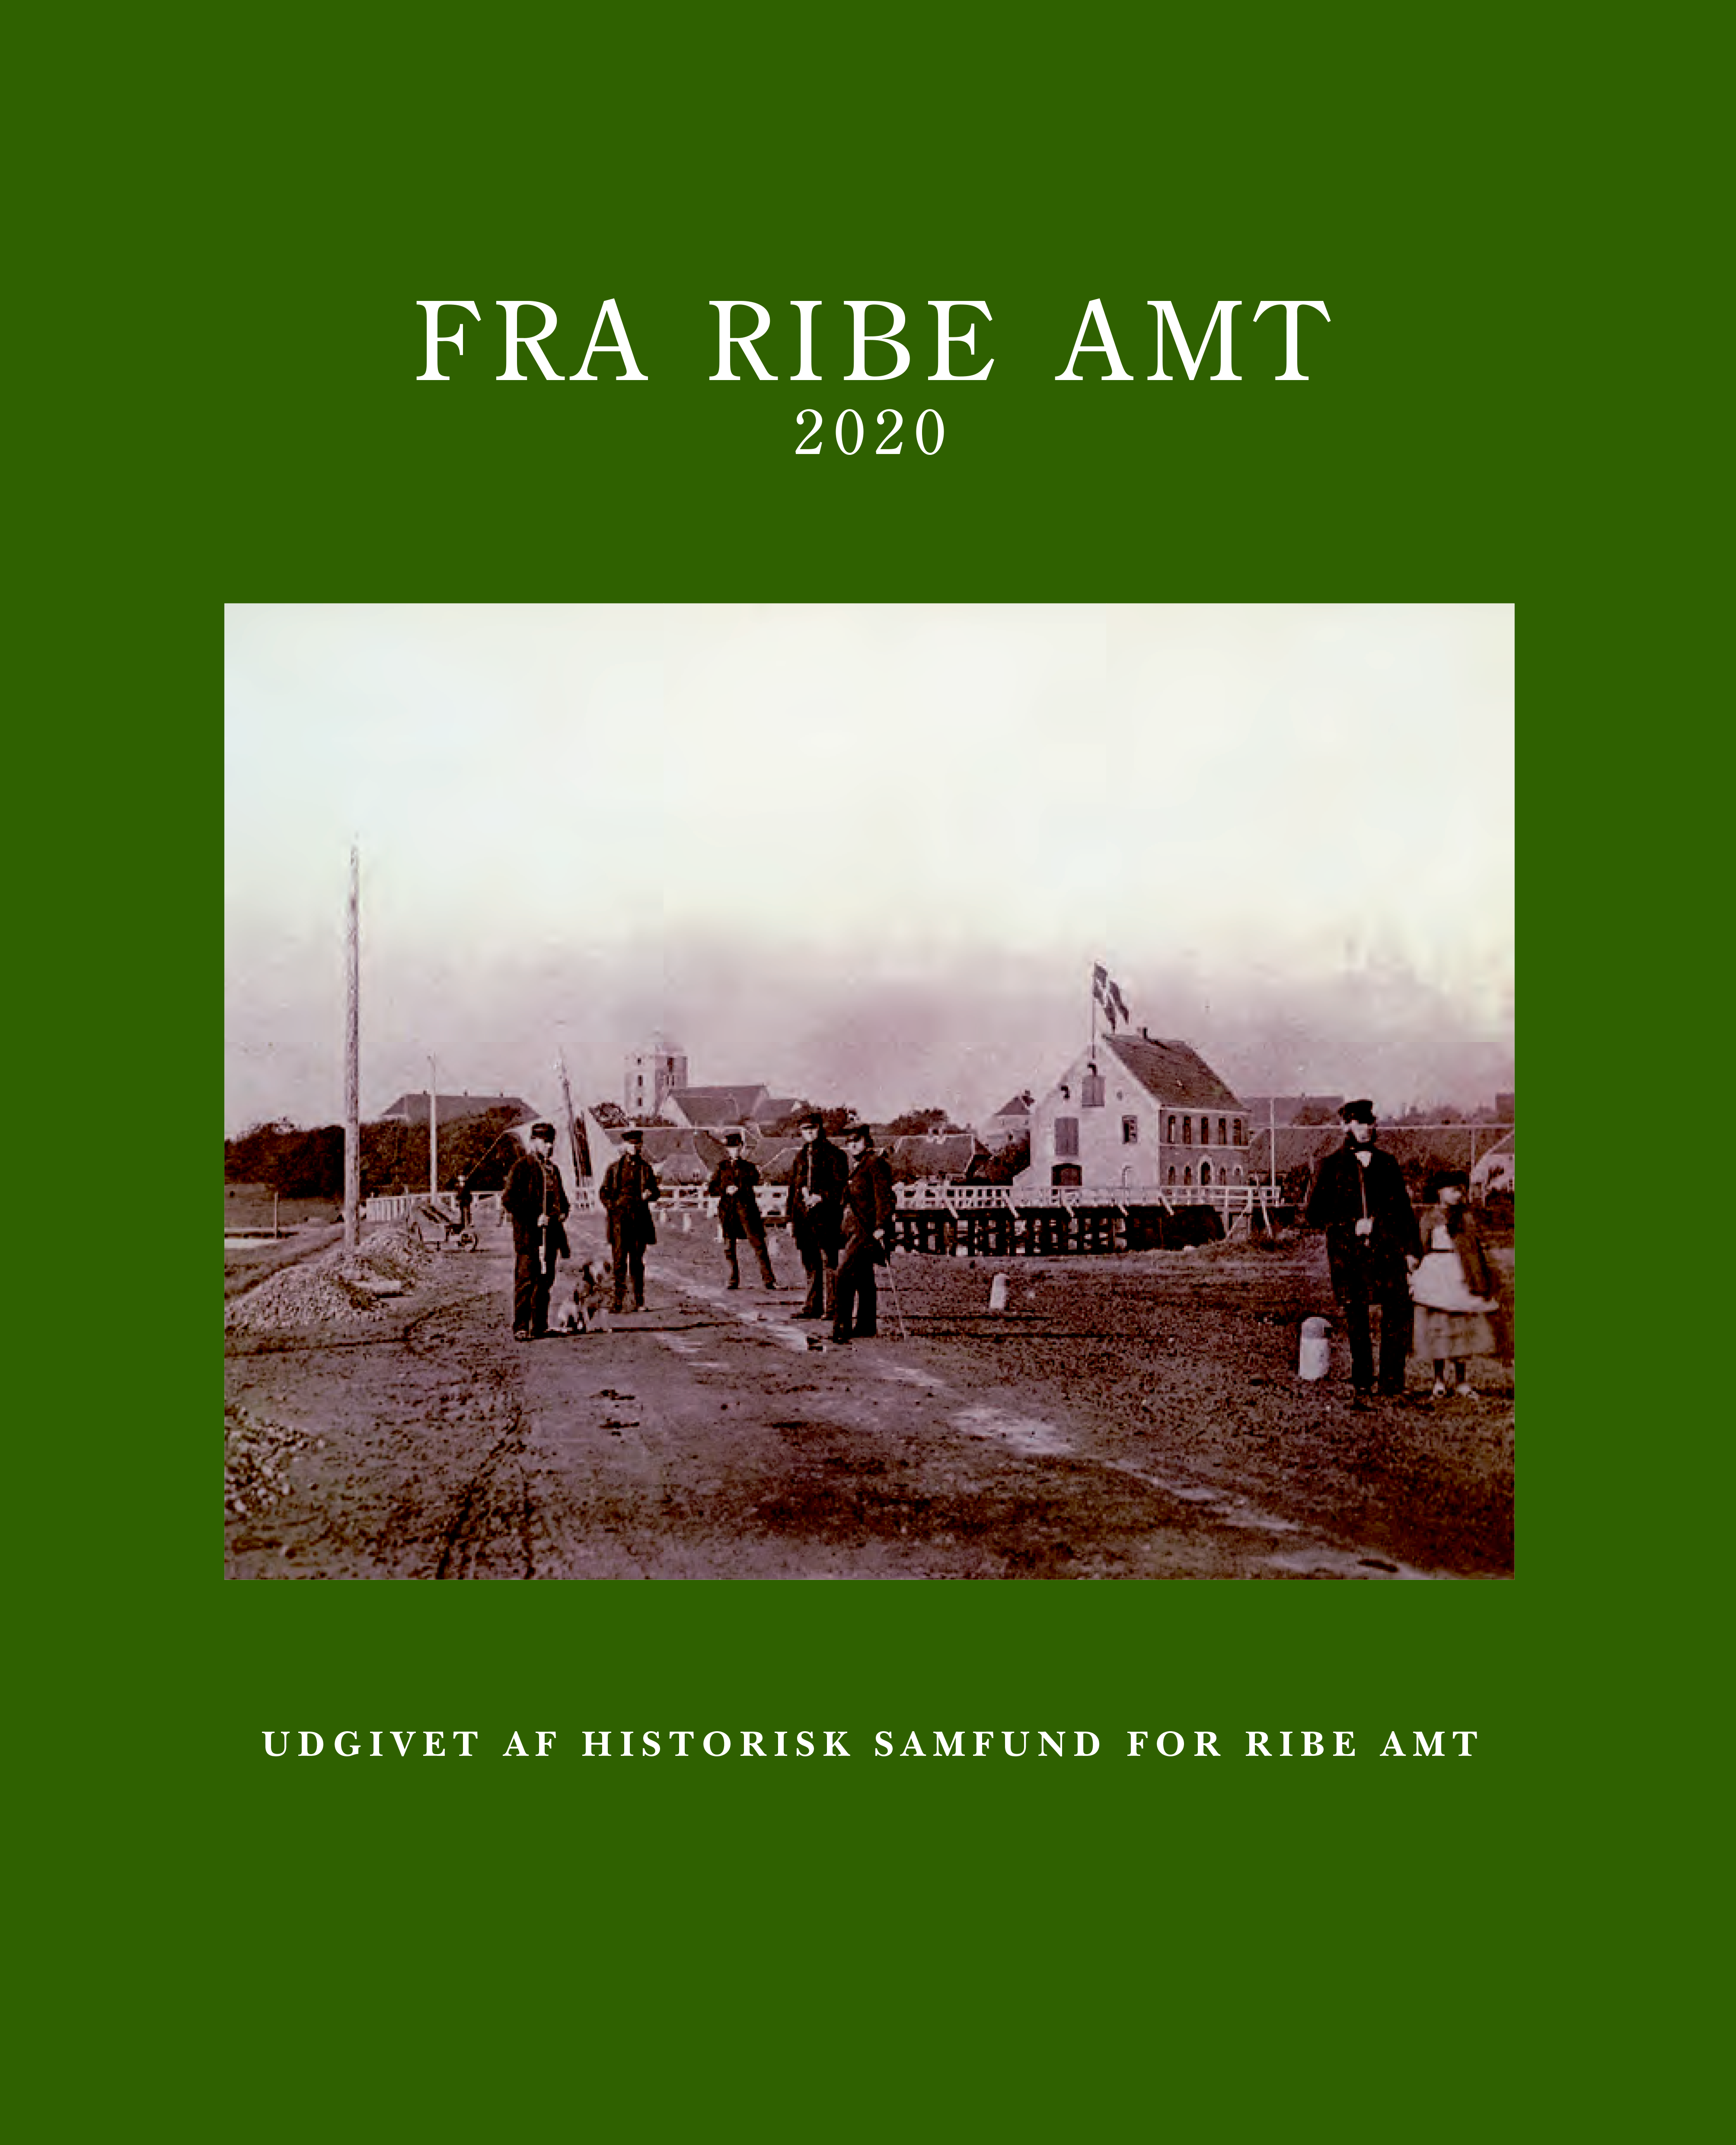 					View 2020: Fra Ribe Amt
				